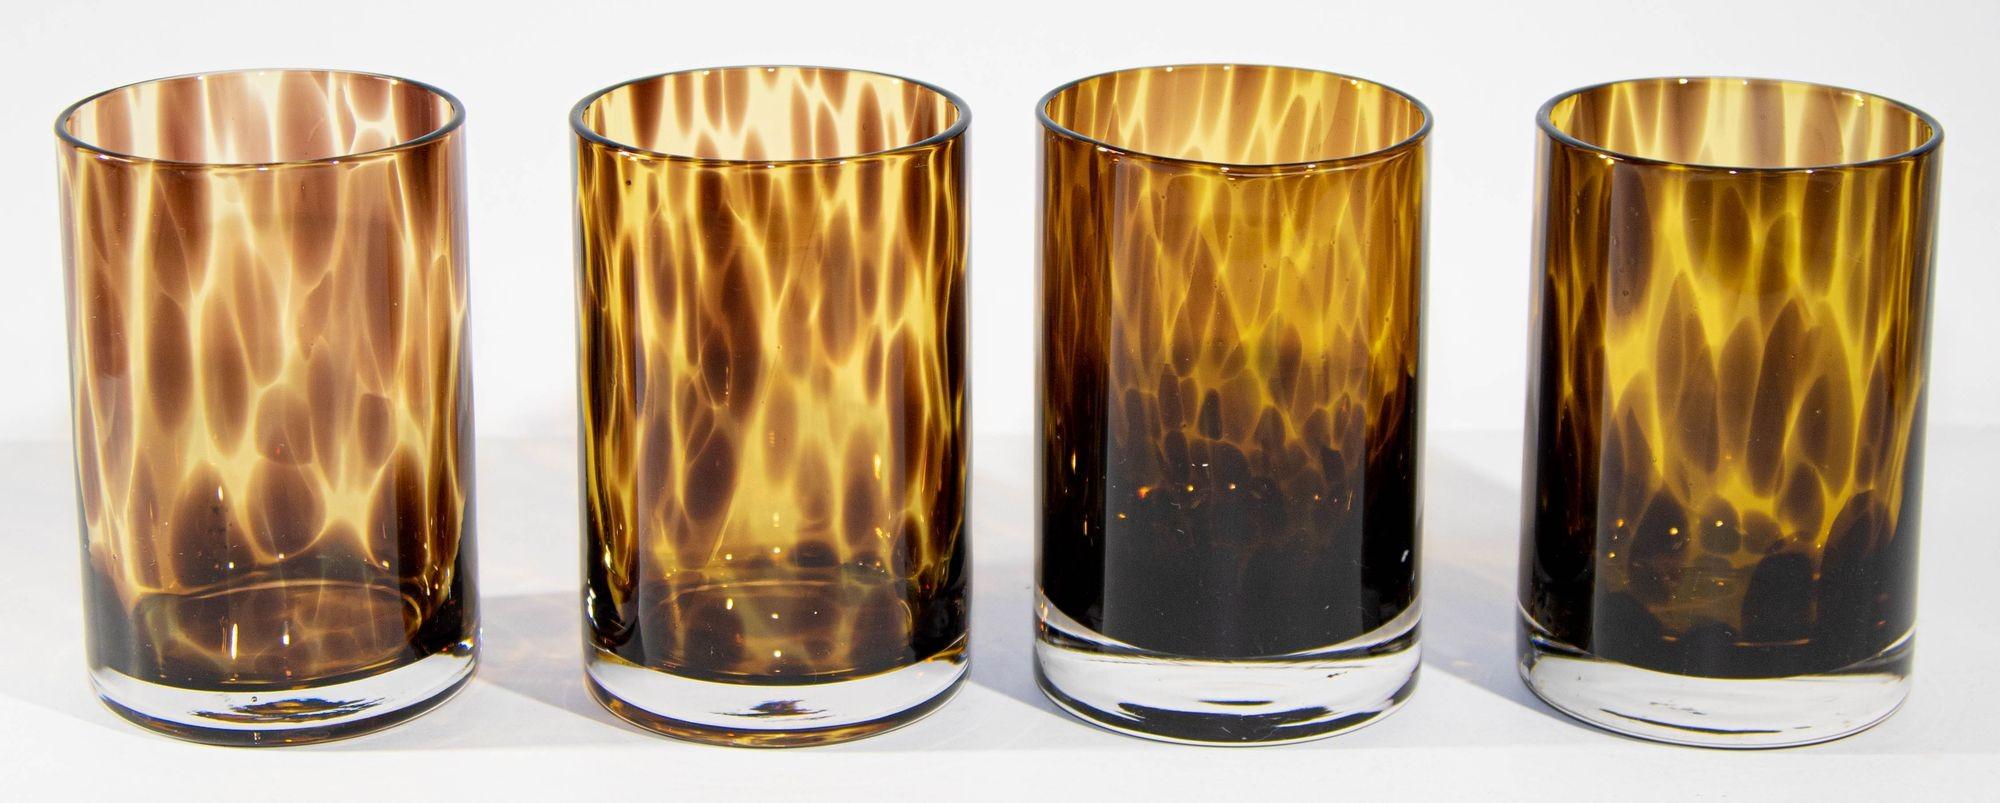 Vintage amber drinking glasses set of four tumbler glasses mouth-blown with exclusive tortoiseshell color flowing pattern.
A distinctive tortoise shell motif brings rich color and dimension to a glass barware set that makes a stunning addition to